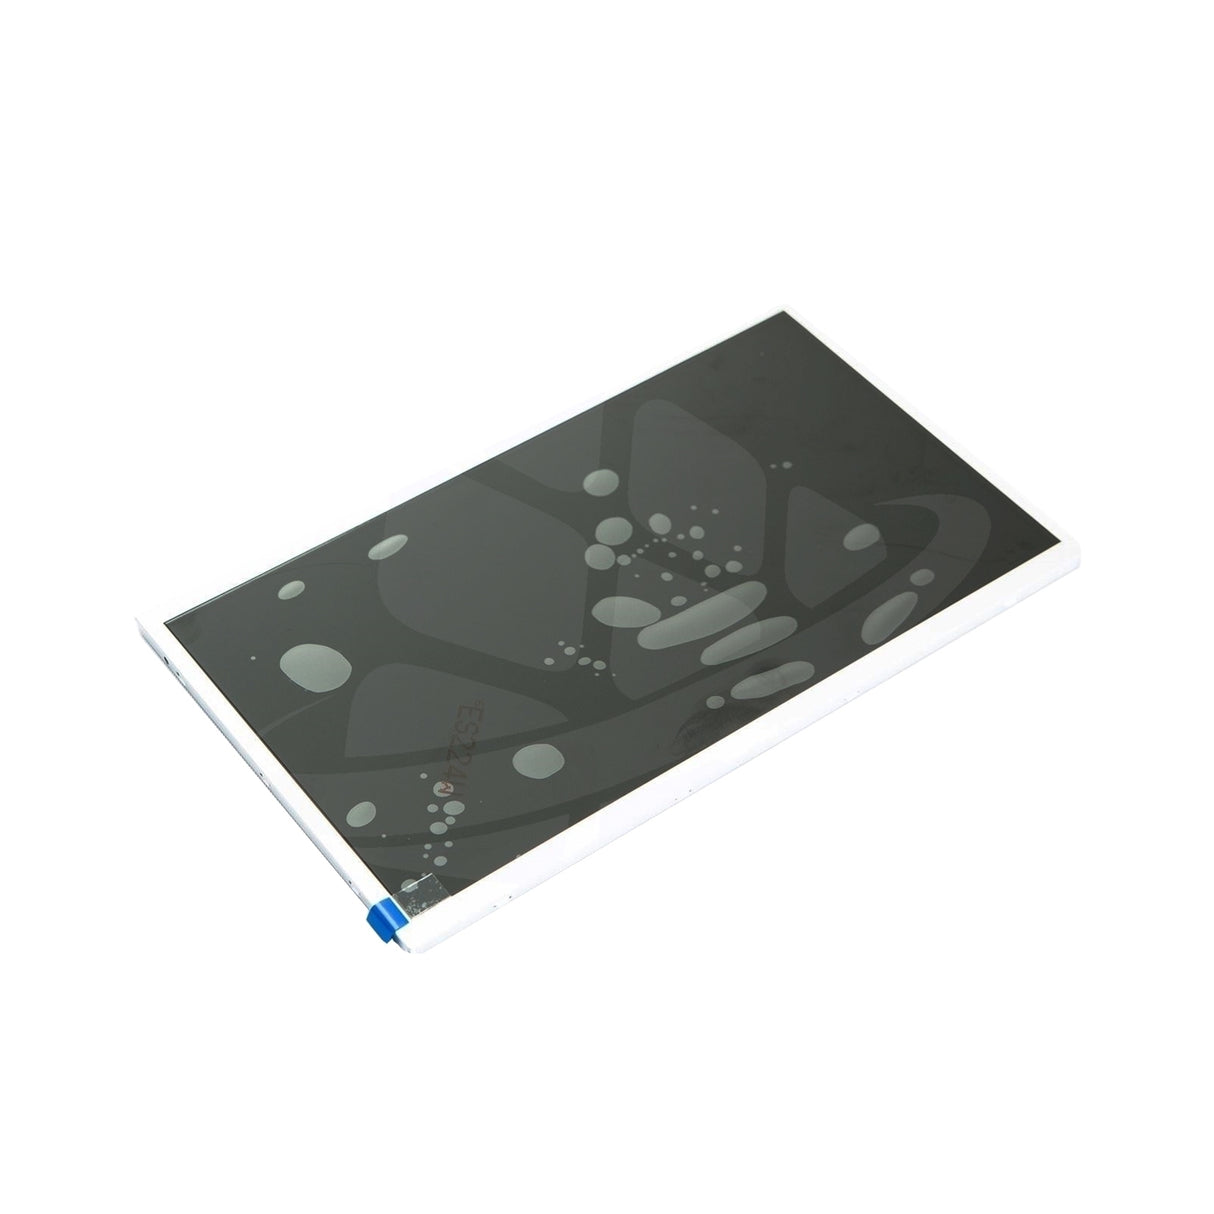 10.1" LCD Panel Only